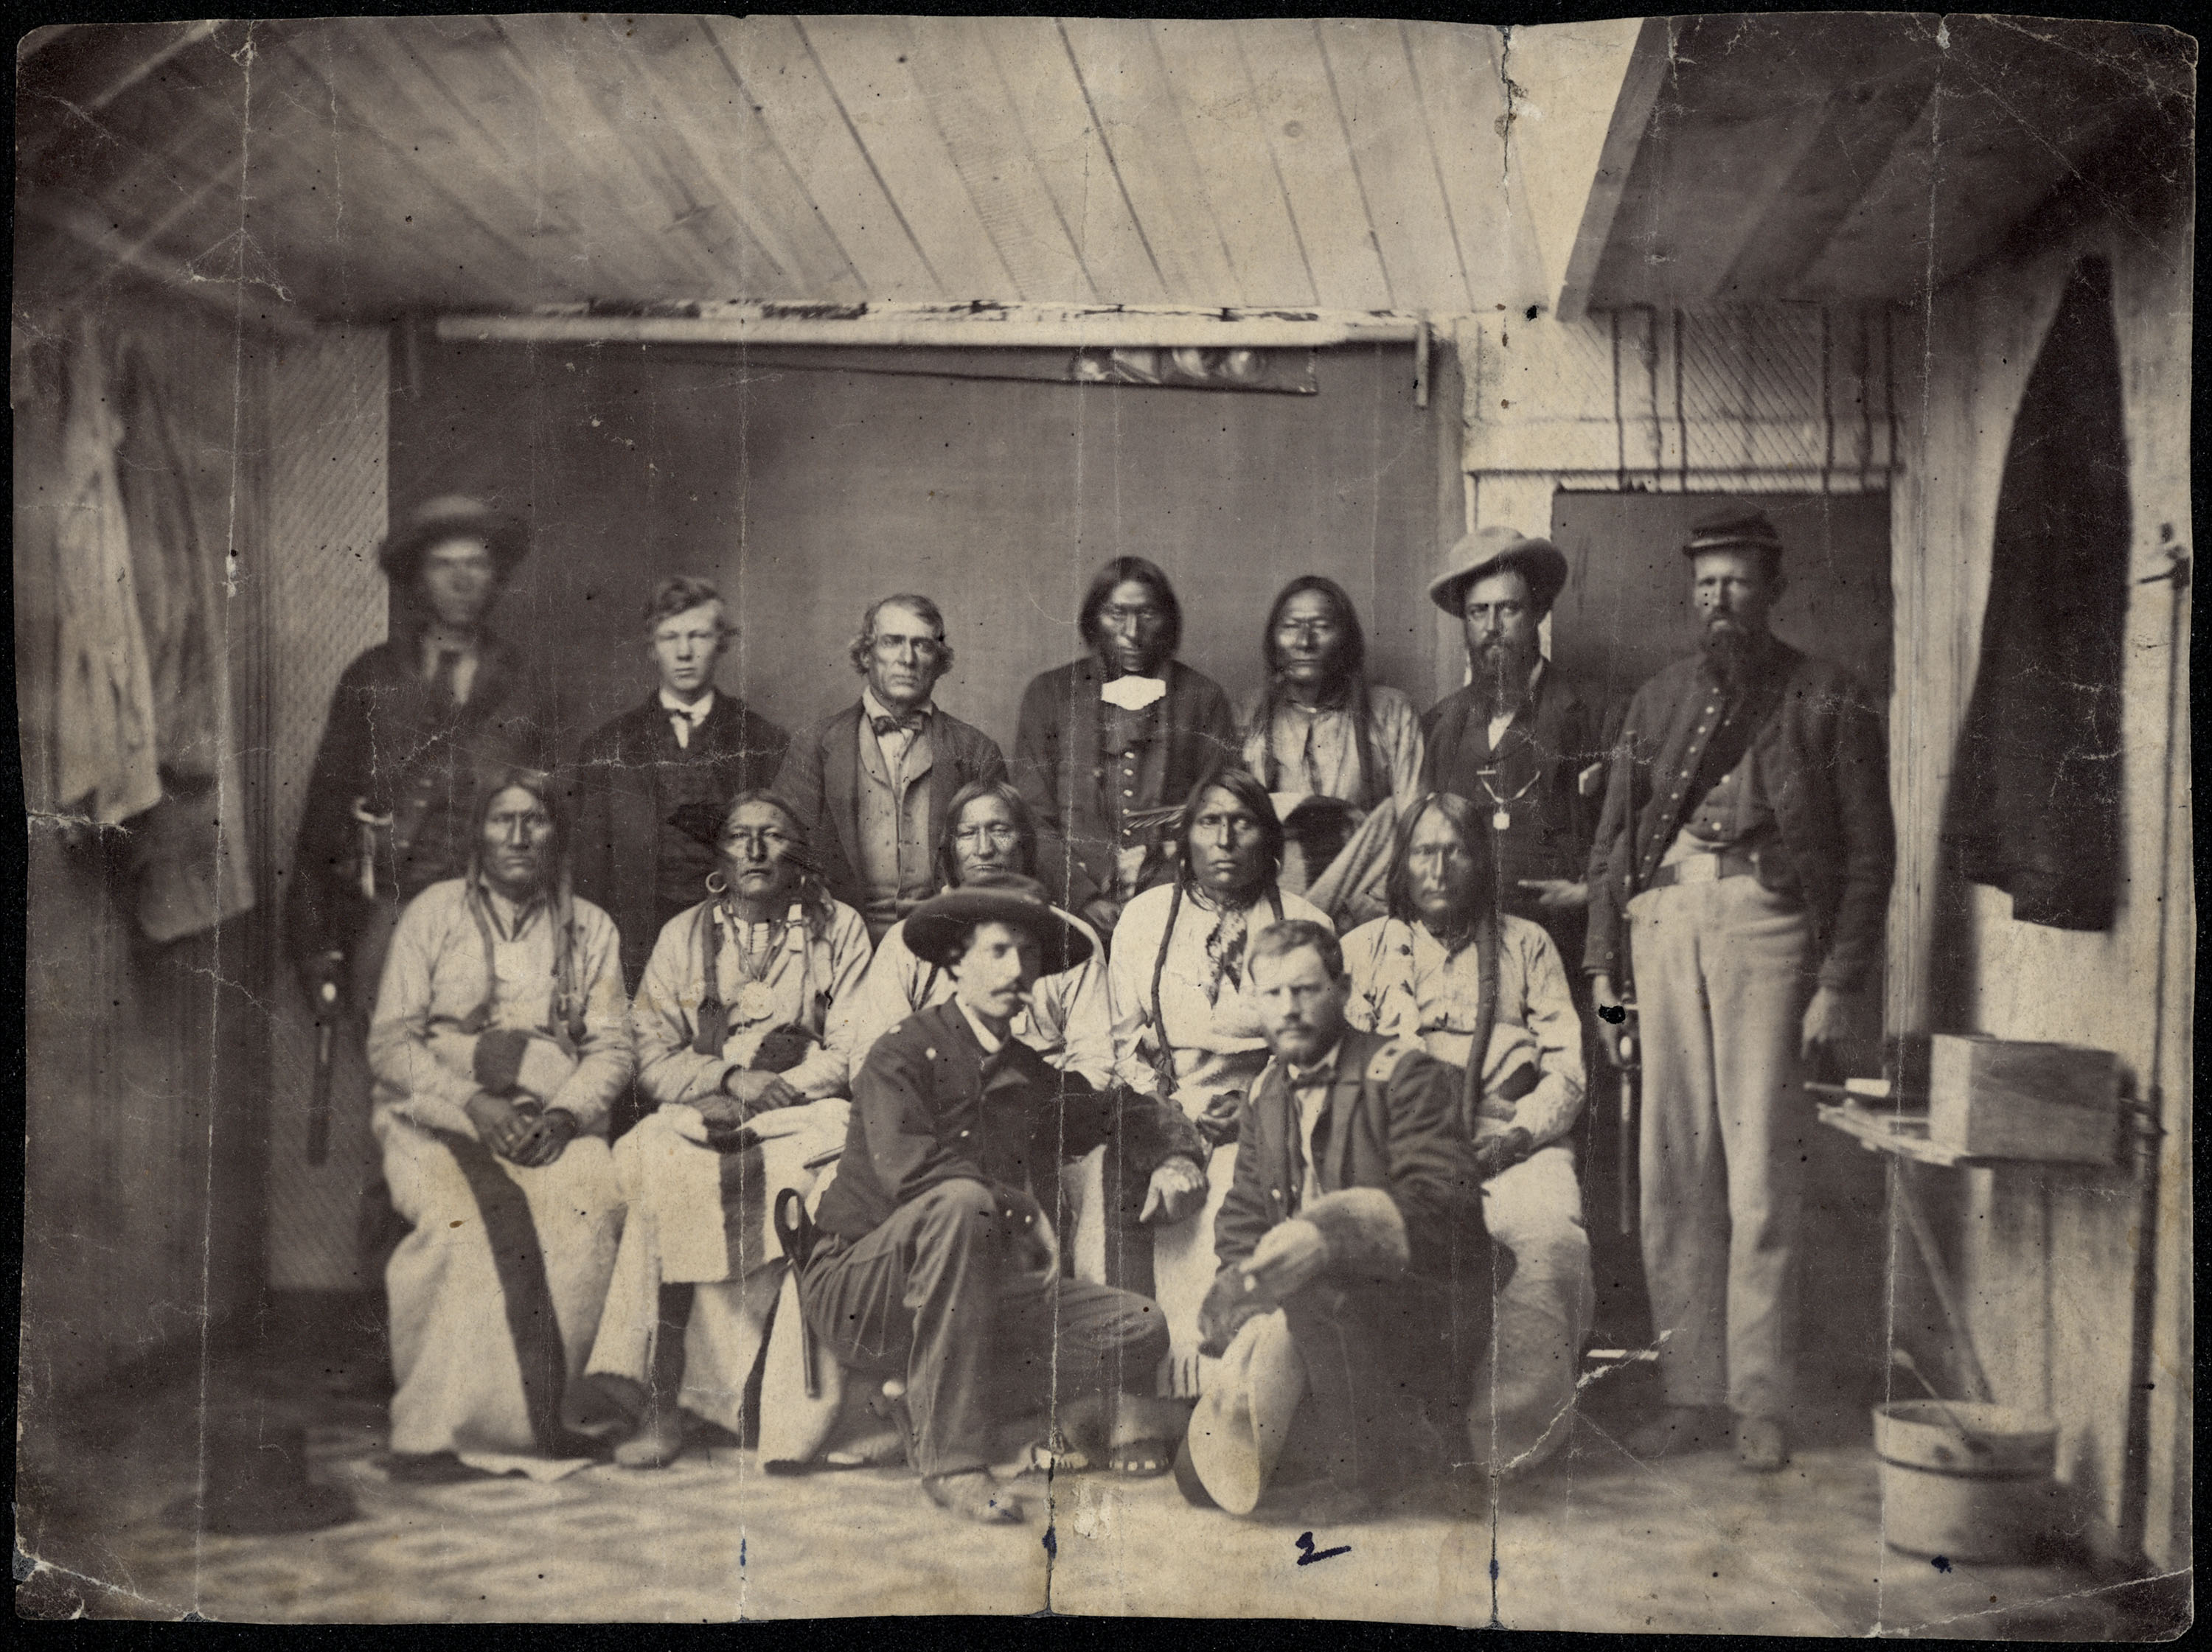 Photo of a group of about 15 men gathered in a small room for a portrait. In the foreground, two soldiers kneel in front, facing the camera. Five Indigenous people are seated in the row behind the two men. Behind them stand seven men, some of whom are Indigenous, and others who are soldiers.